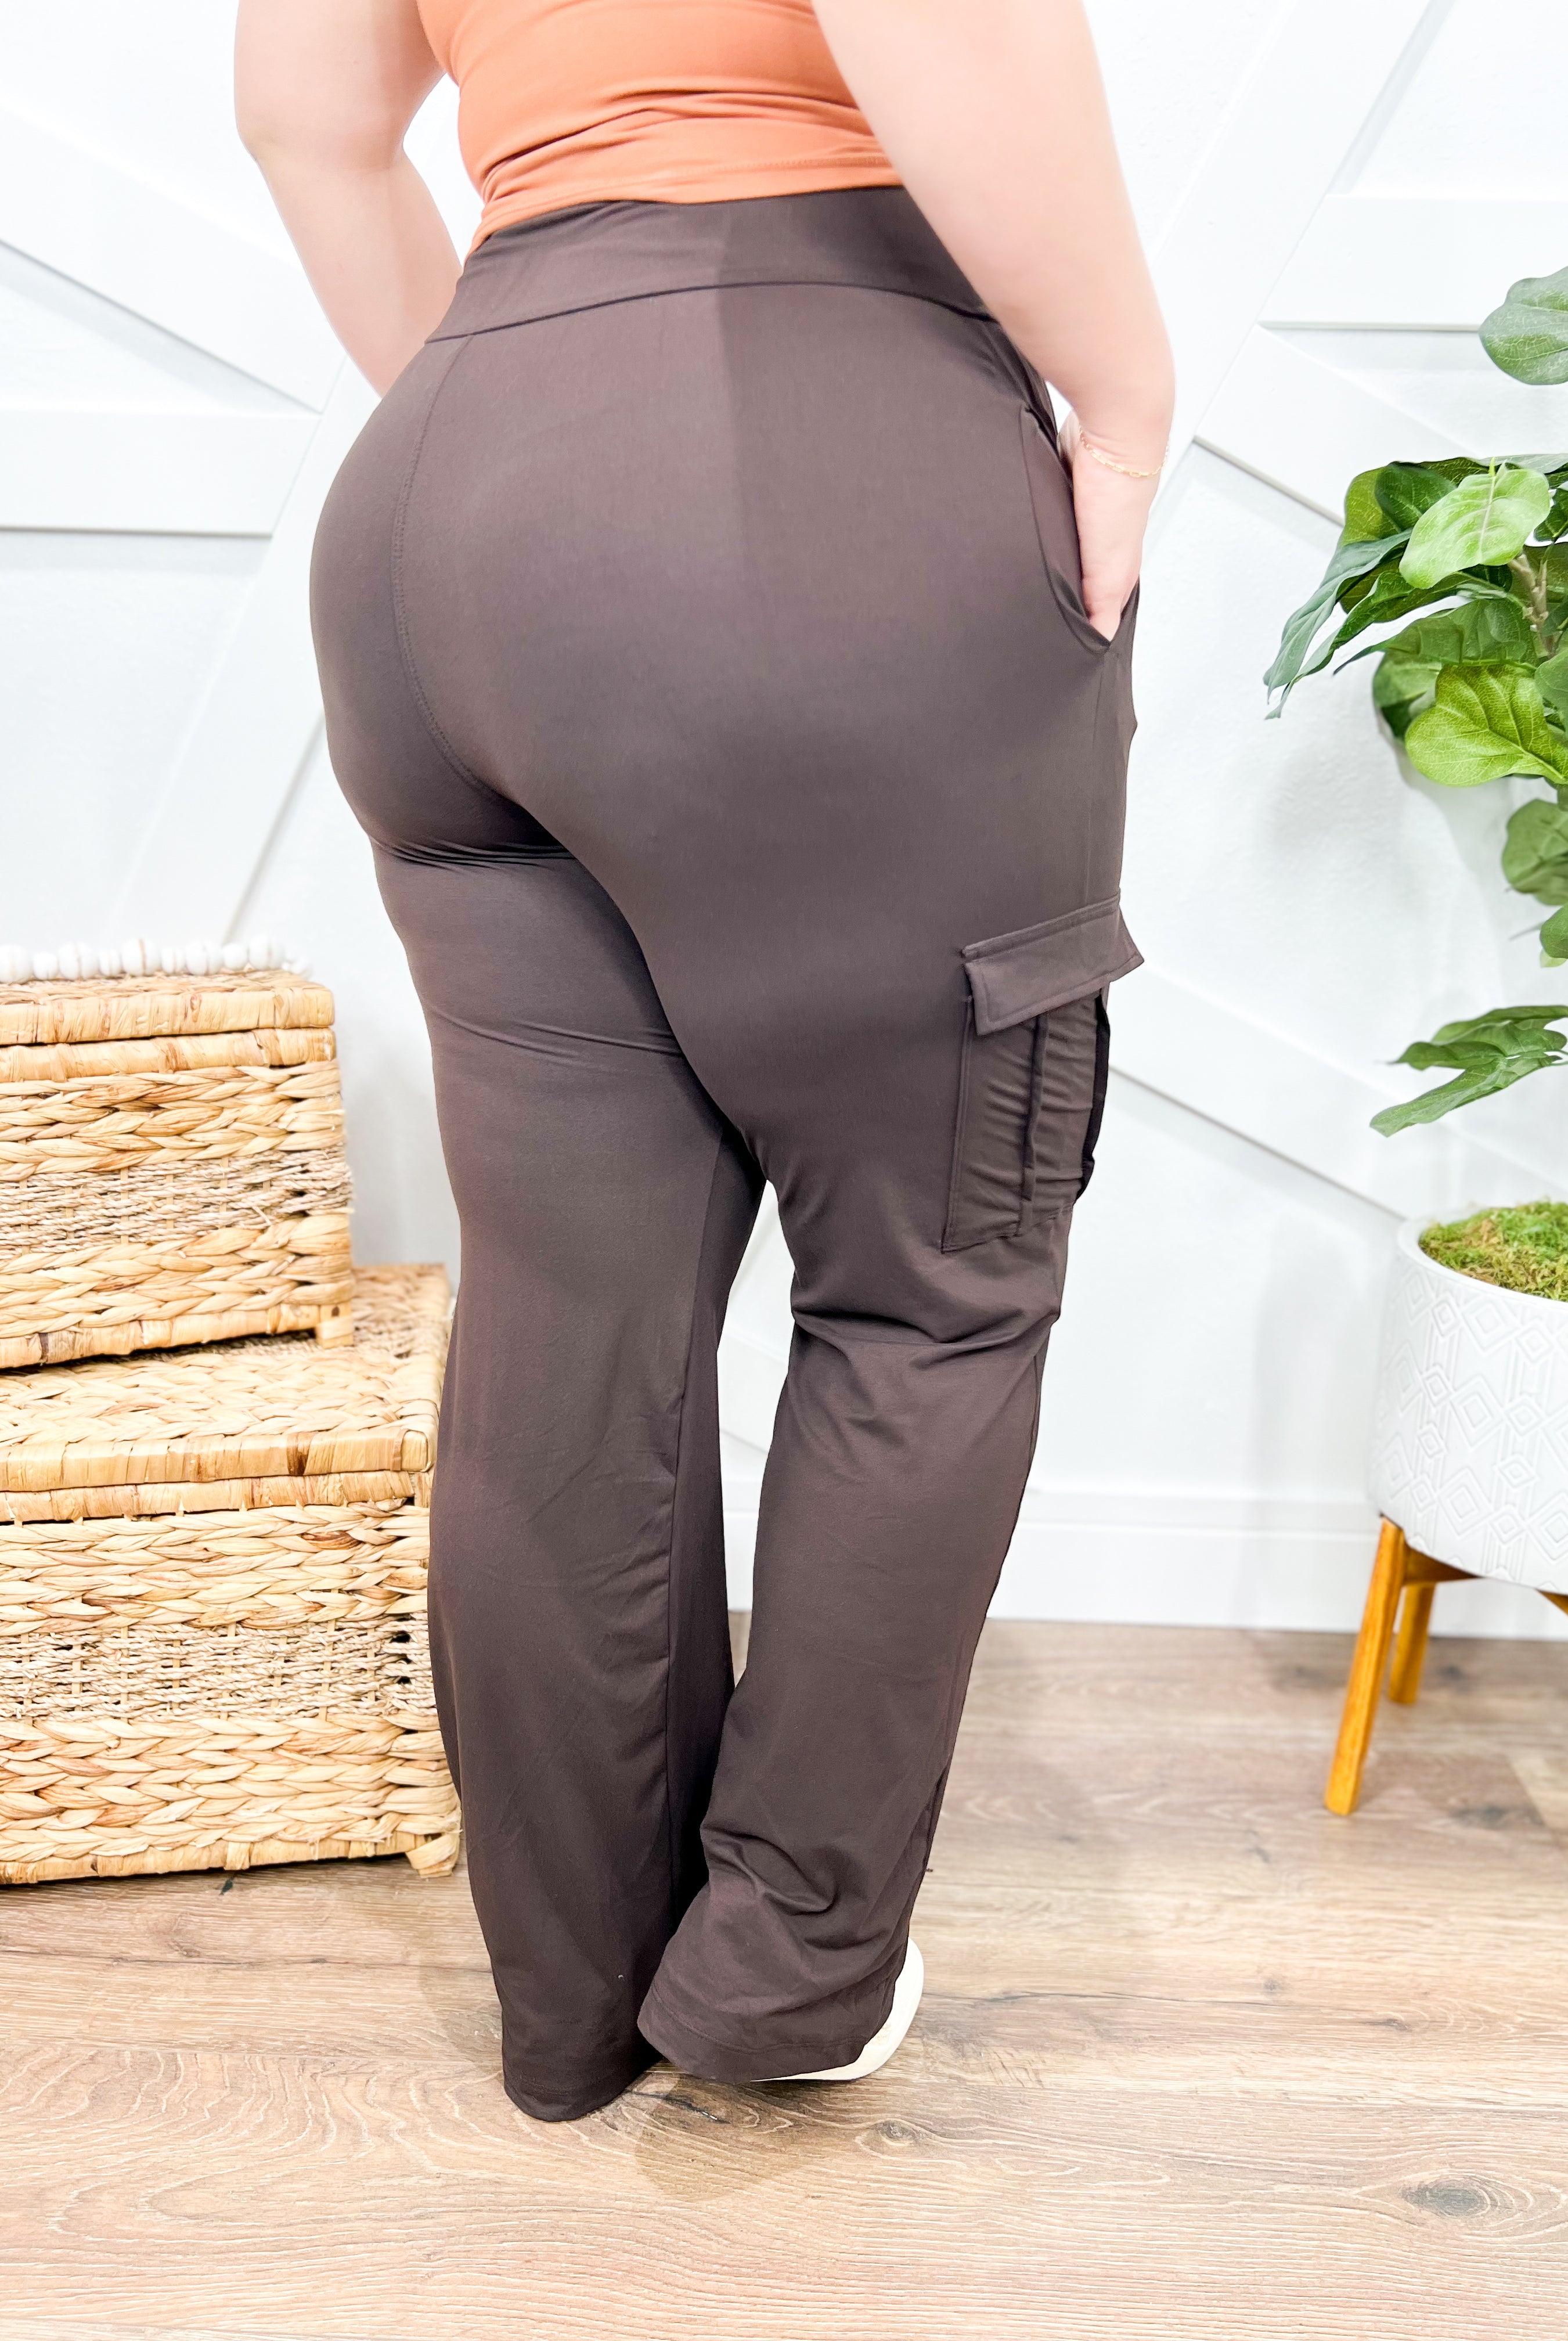 RESTOCK : Kim Possible Cargo Pants-150 PANTS-Rae Mode-Heathered Boho Boutique, Women's Fashion and Accessories in Palmetto, FL